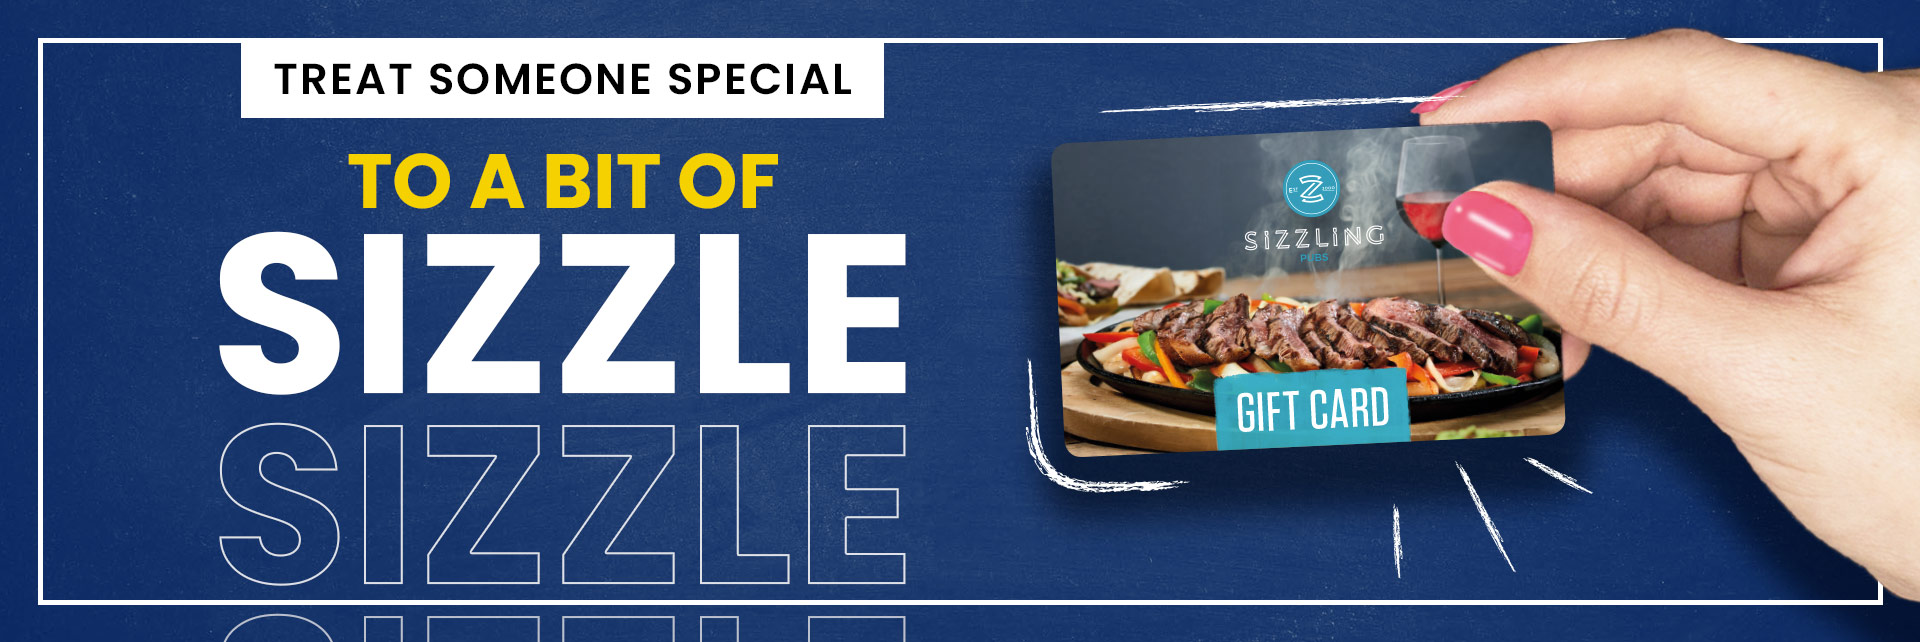 Sizzling Pubs Gift Card at Alt Park in Liverpool